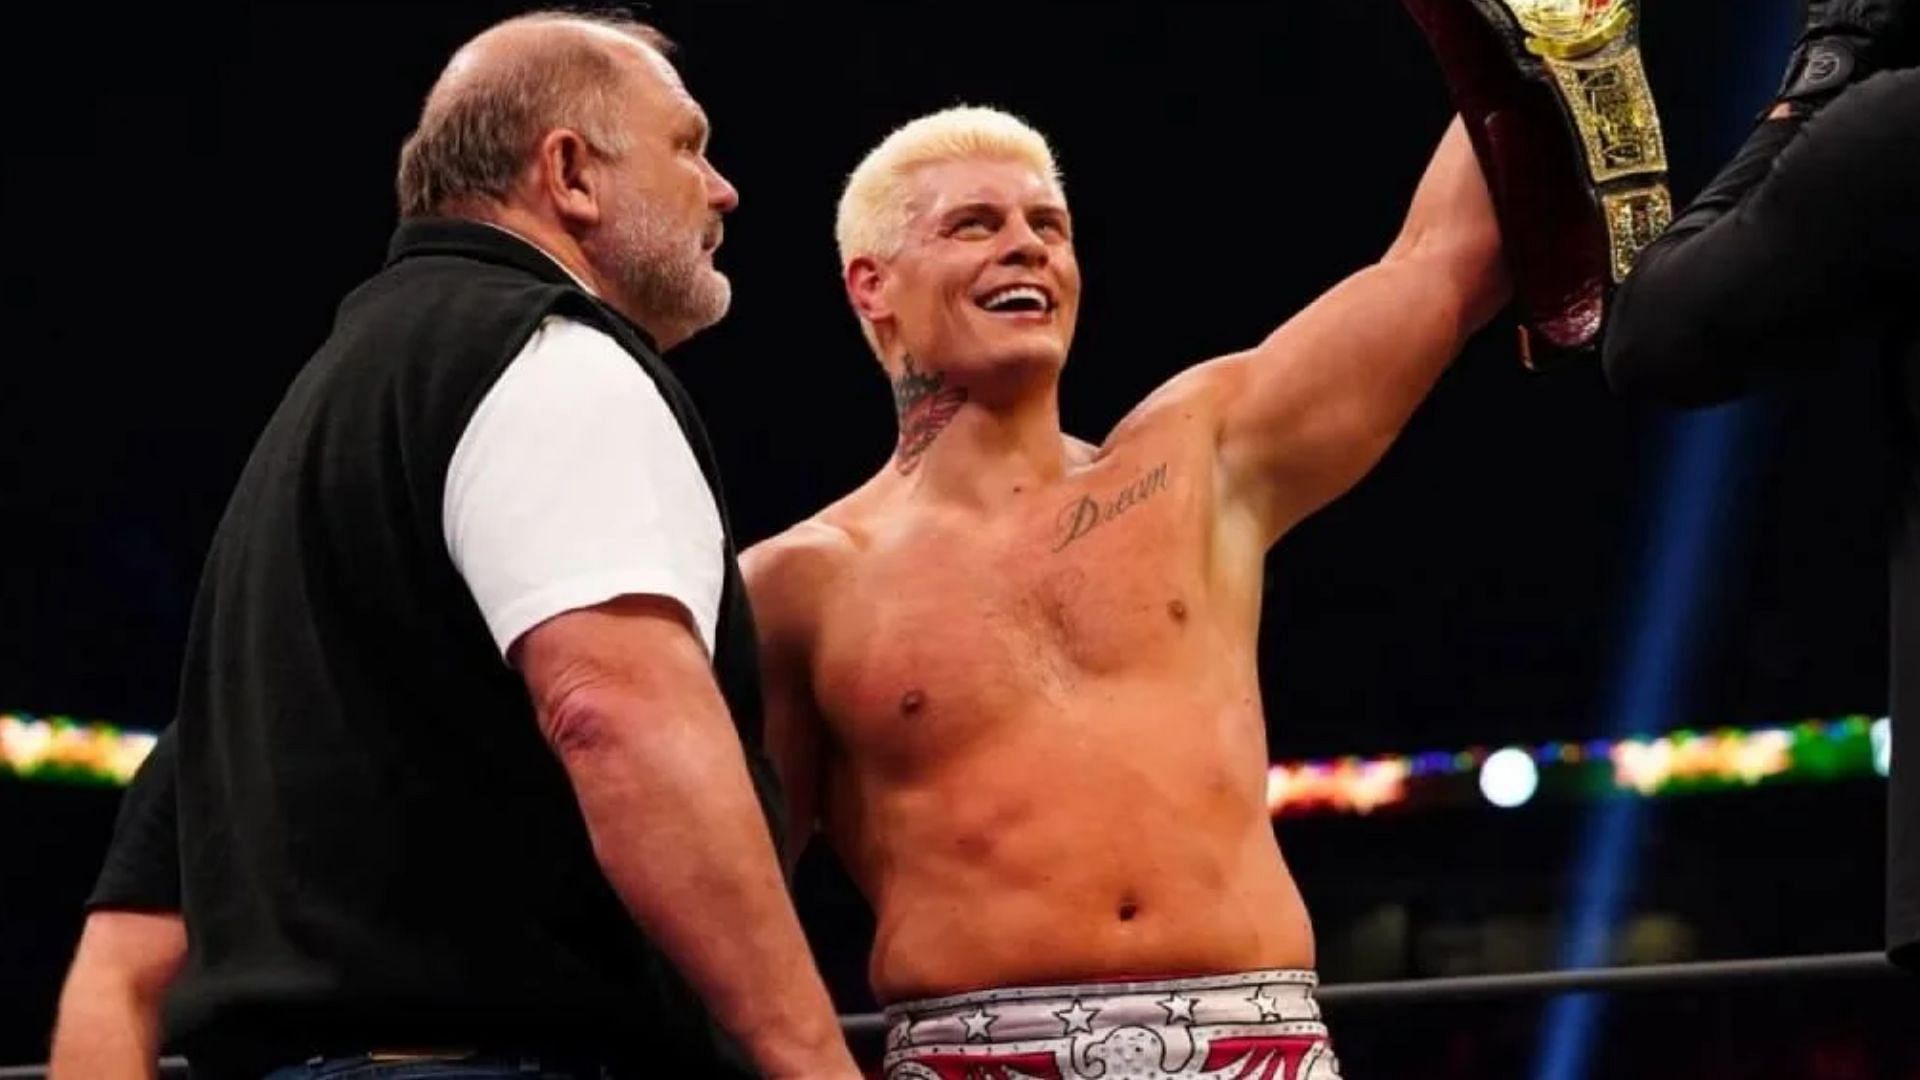 Cody Rhodes is a 3 times champion in AEW